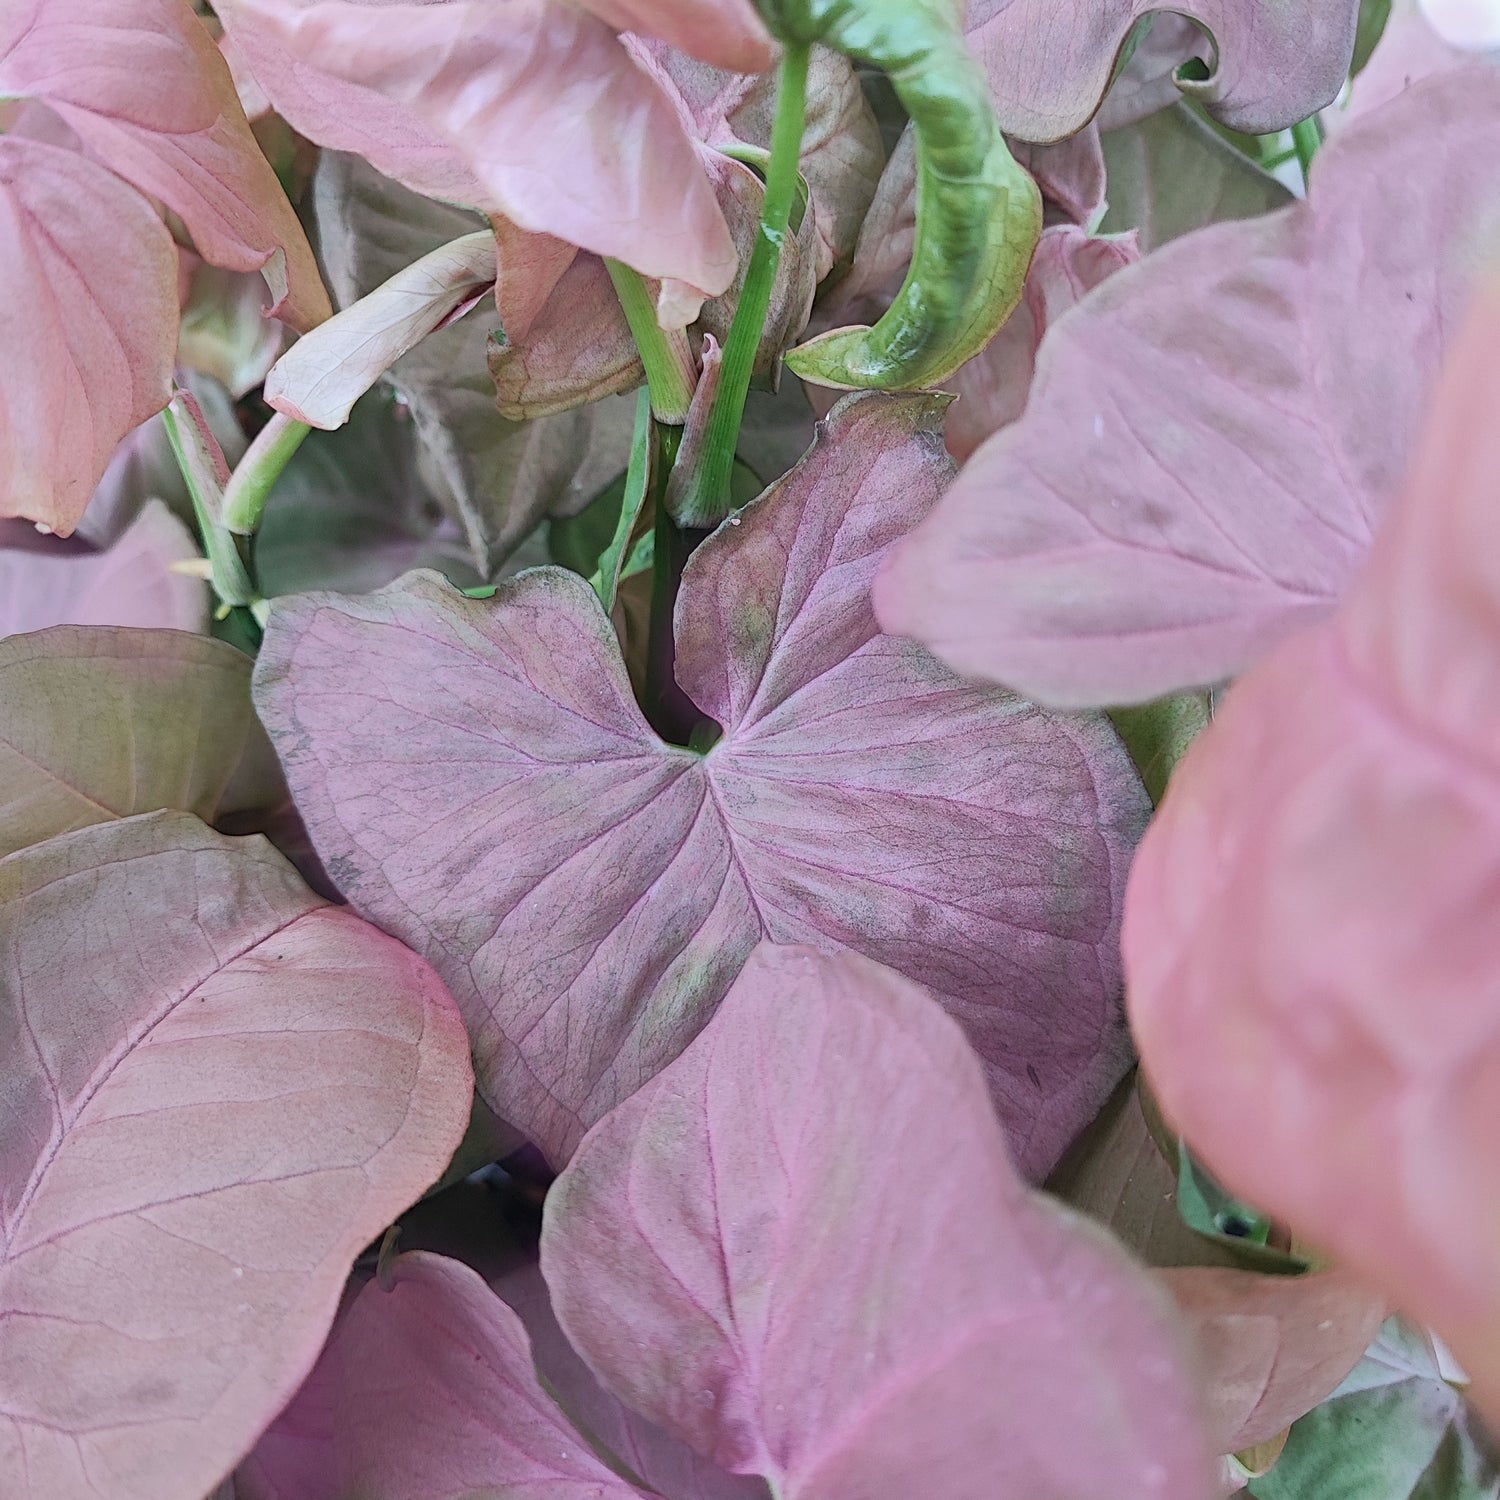 Syngonium pink delight - Magnificent pink cutting